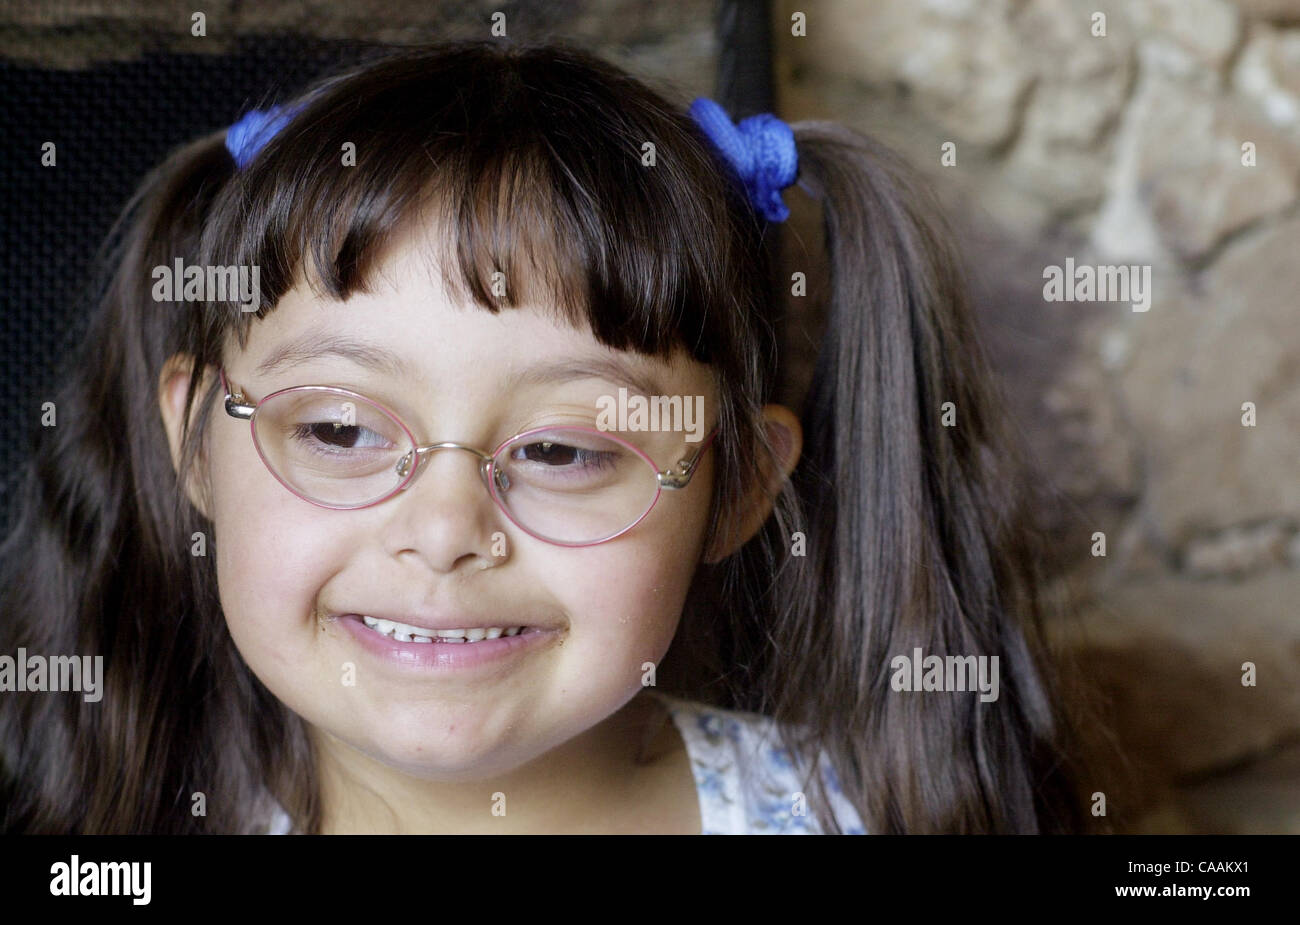 (PUBLISHED 09/27/2002, B-1:2; B-2:1): (duplicate image of 001) Melina Lerma, a six-year-old from Lakeside, will be participating in the National Down Syndrome Awareness Campaign in New York City. Her photo will appear in a video productionthat will be displayed on the Times Square Astrovision. Earni Stock Photo